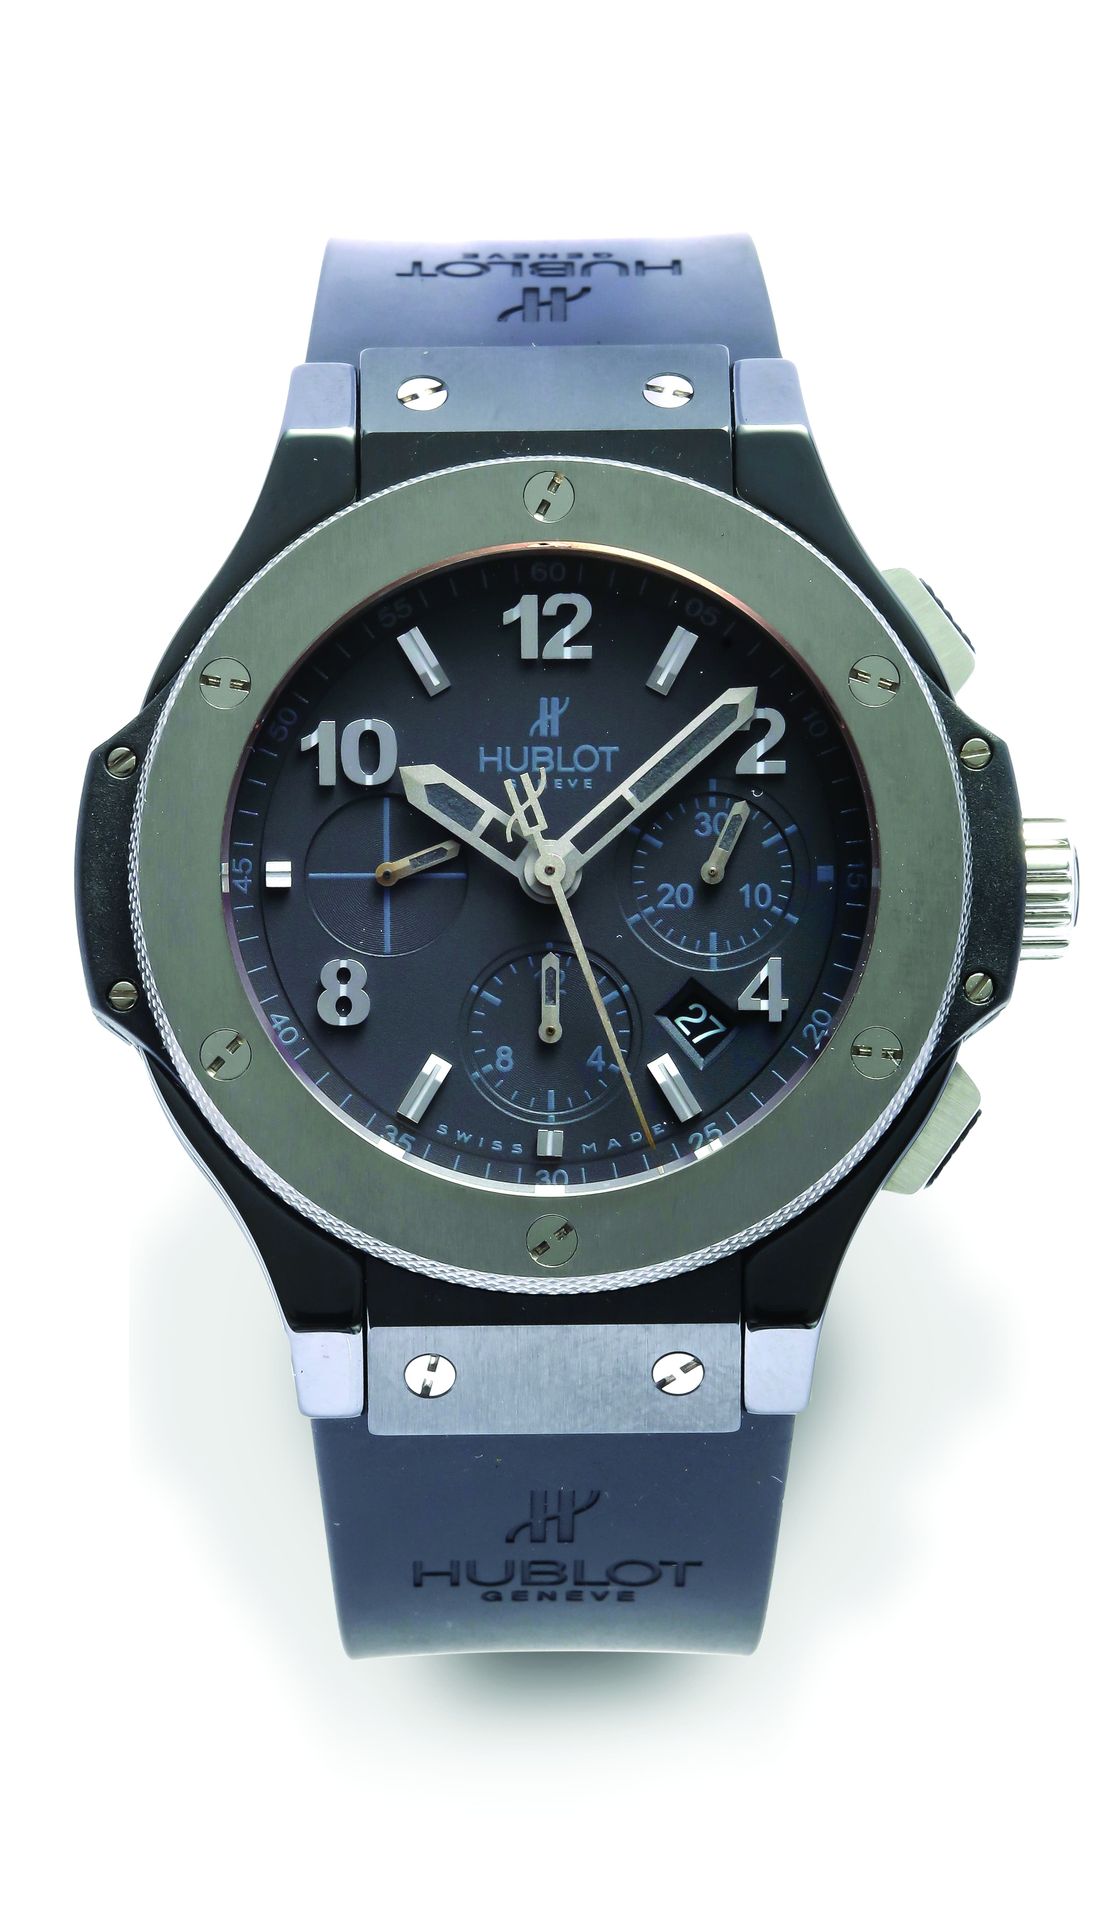 HUBLOT Big Bang Ice - limited edition
Reference 301.CT.130.RX
Sport chronograph &hellip;